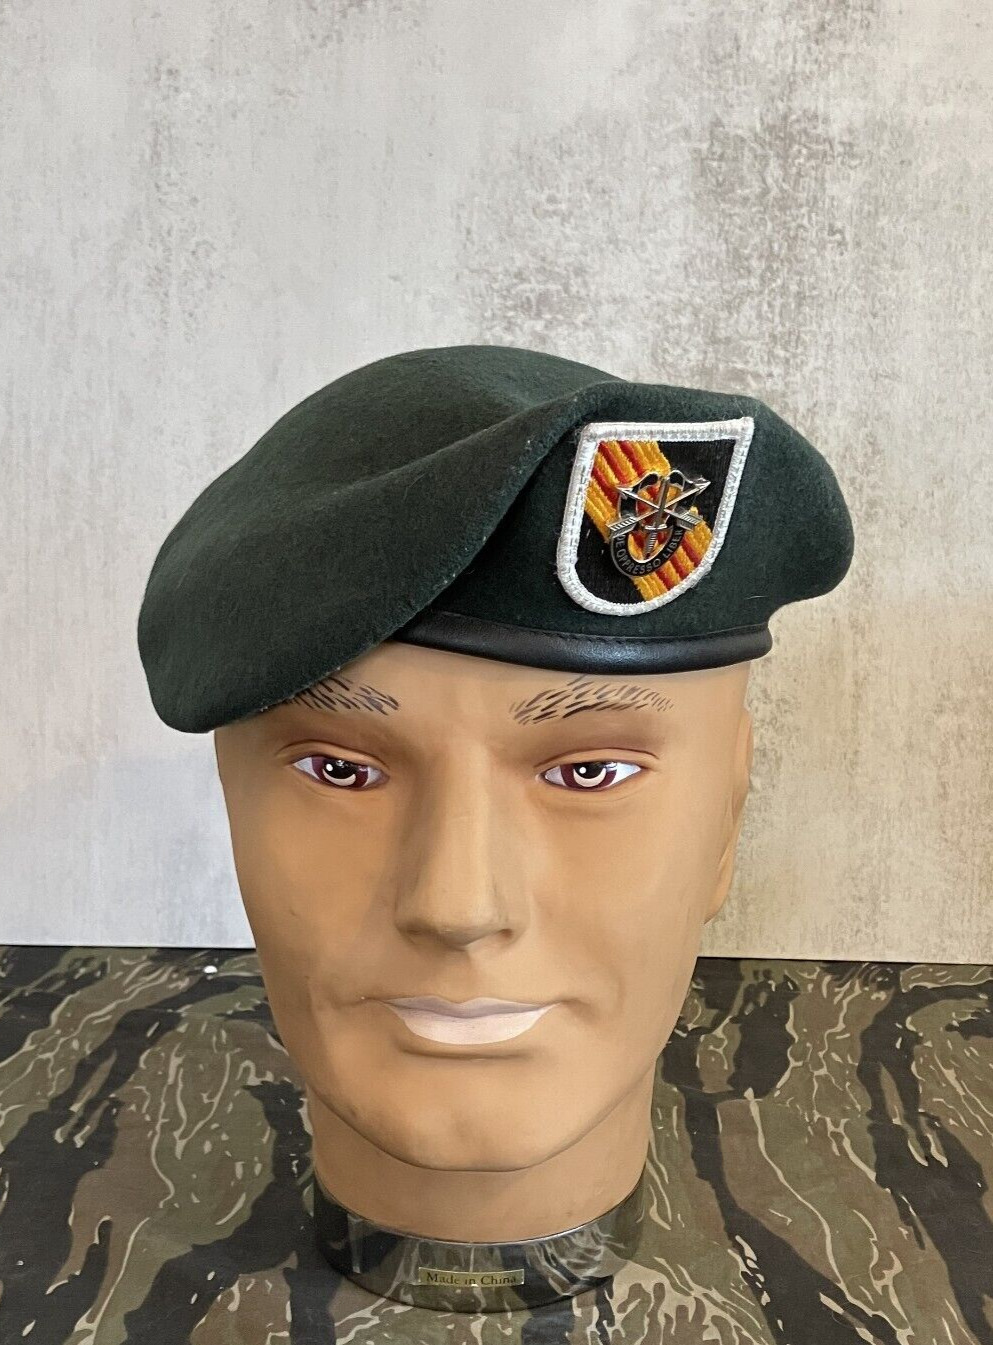 US Army 5th Special Forces Group Special Forces Beret by Bancroft size 7 3/8